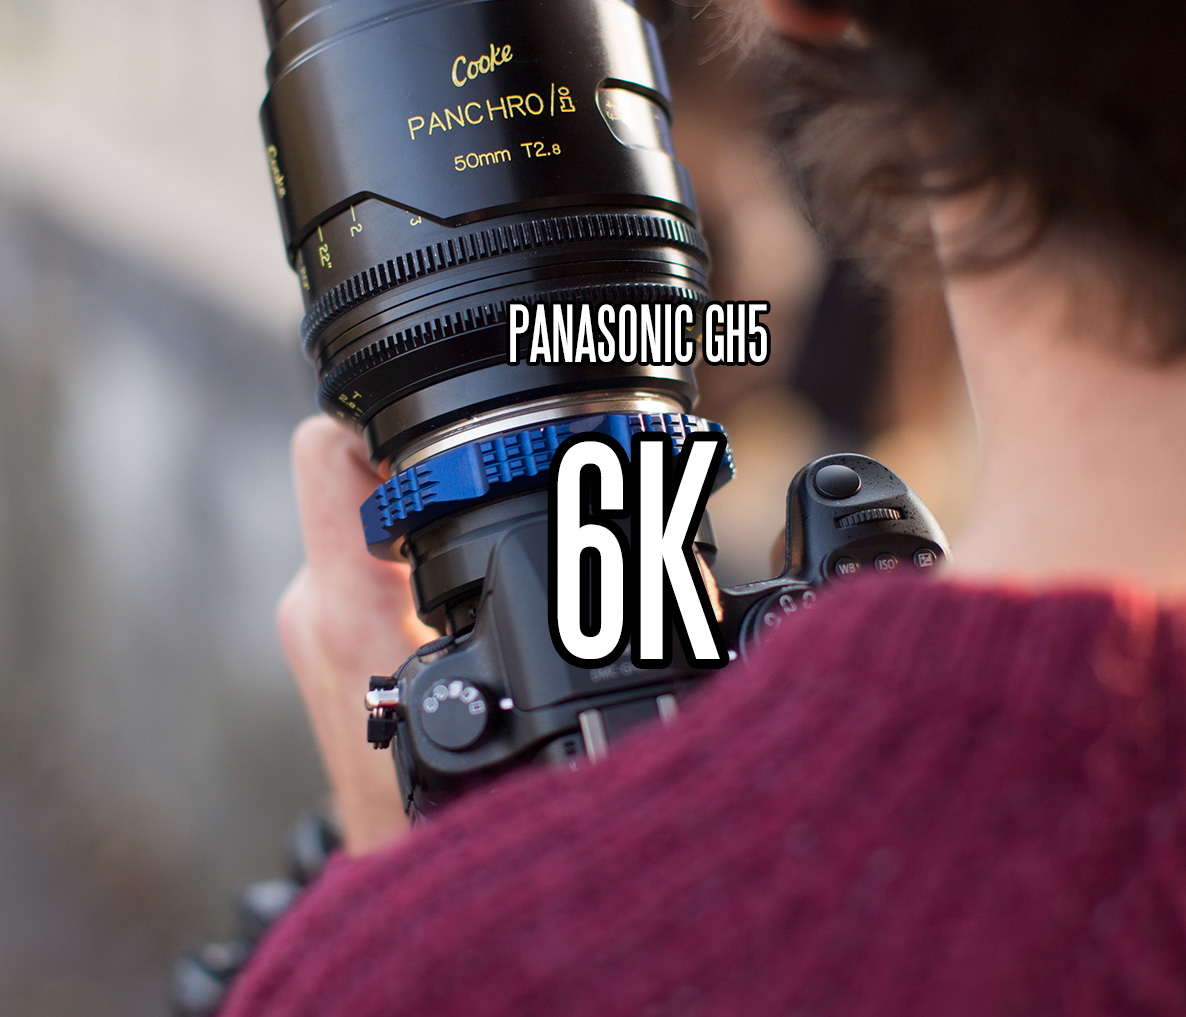 Very exciting if true - Panasonic sounds like a bomb - including 6K from 20MP sensor - but something does add up! - EOSHD.com - Filmmaking Gear and Camera Reviews